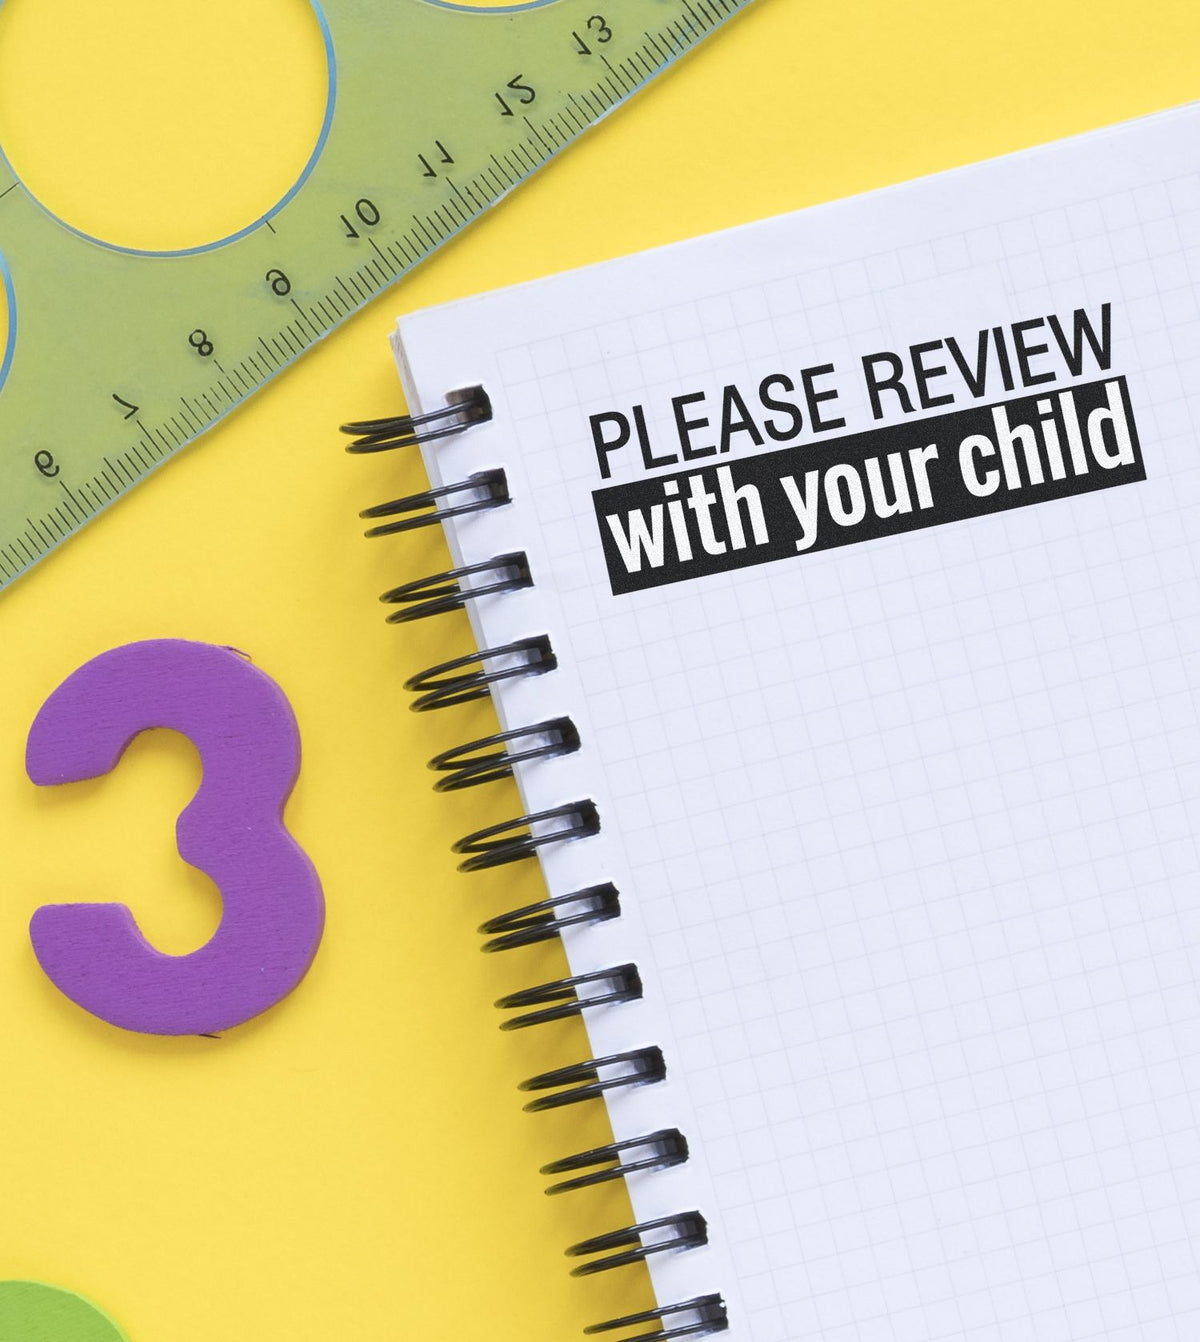 Large Please Review with your child Rubber Stamp Lifestyle Photo